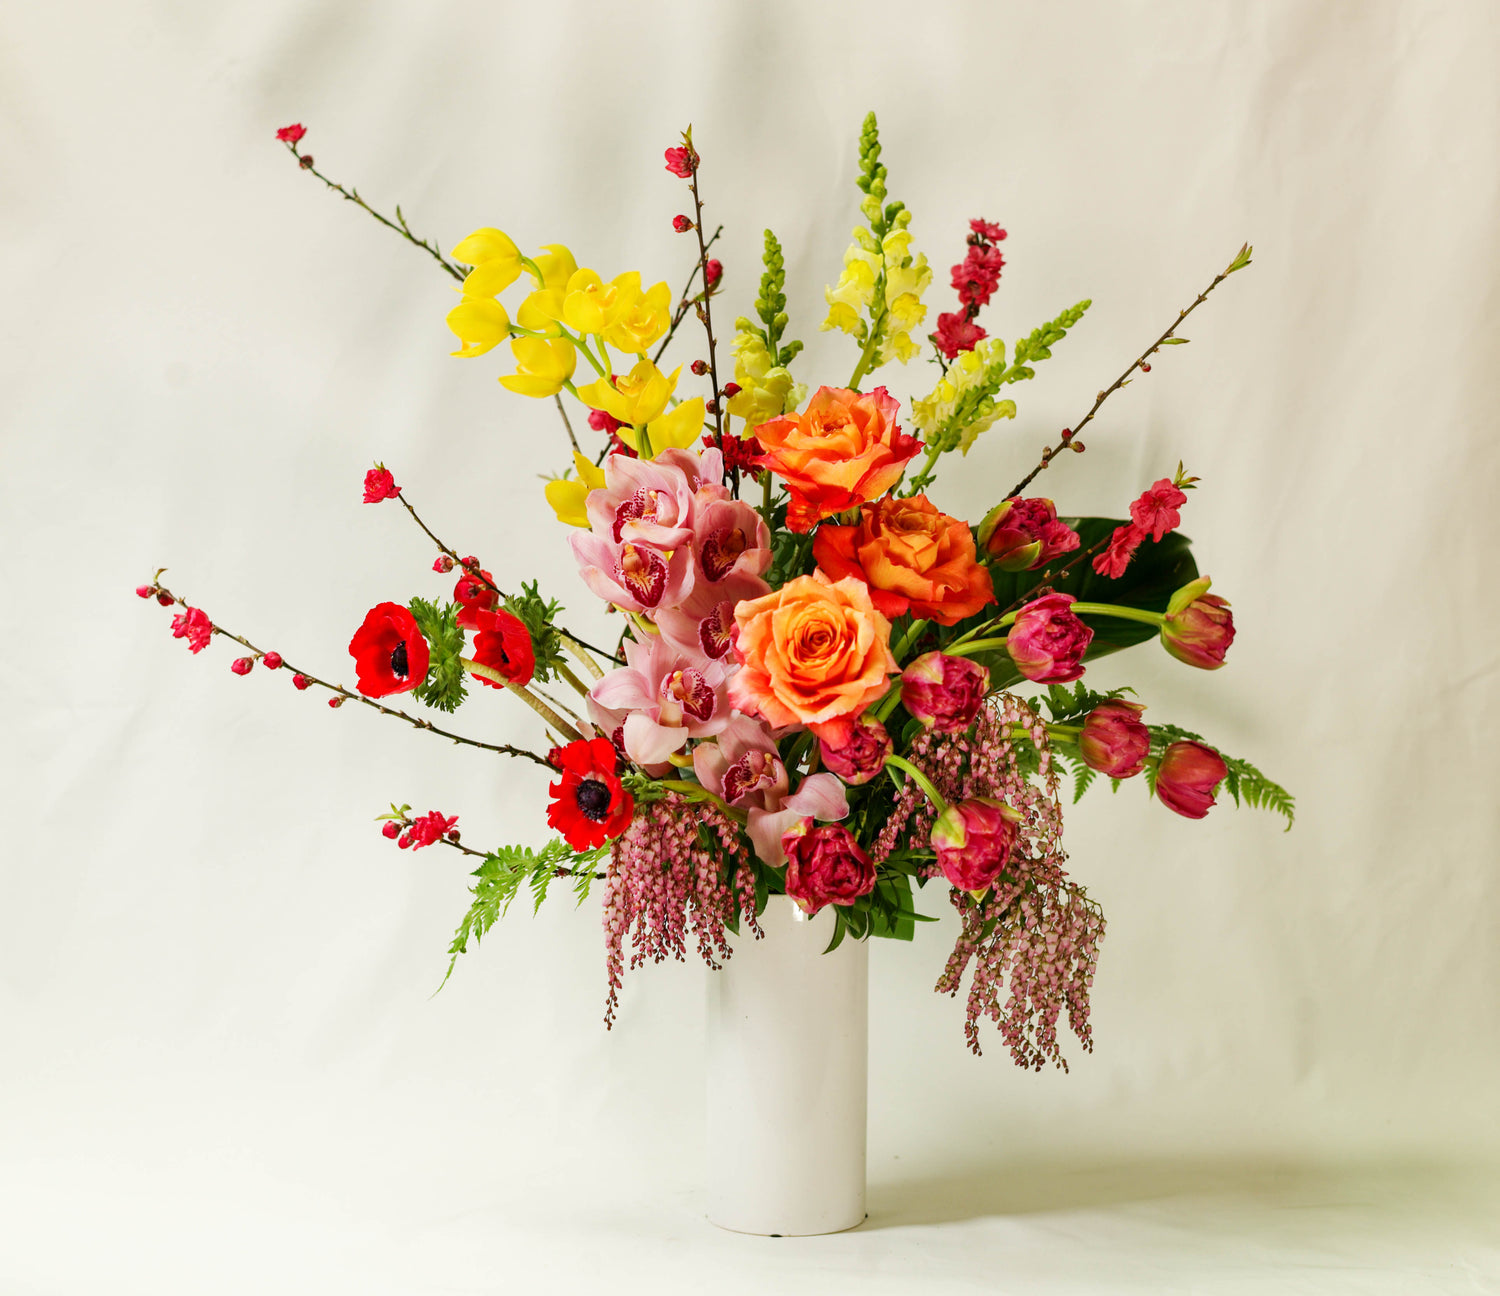 Colourful, zesty flower blooms for any celebration